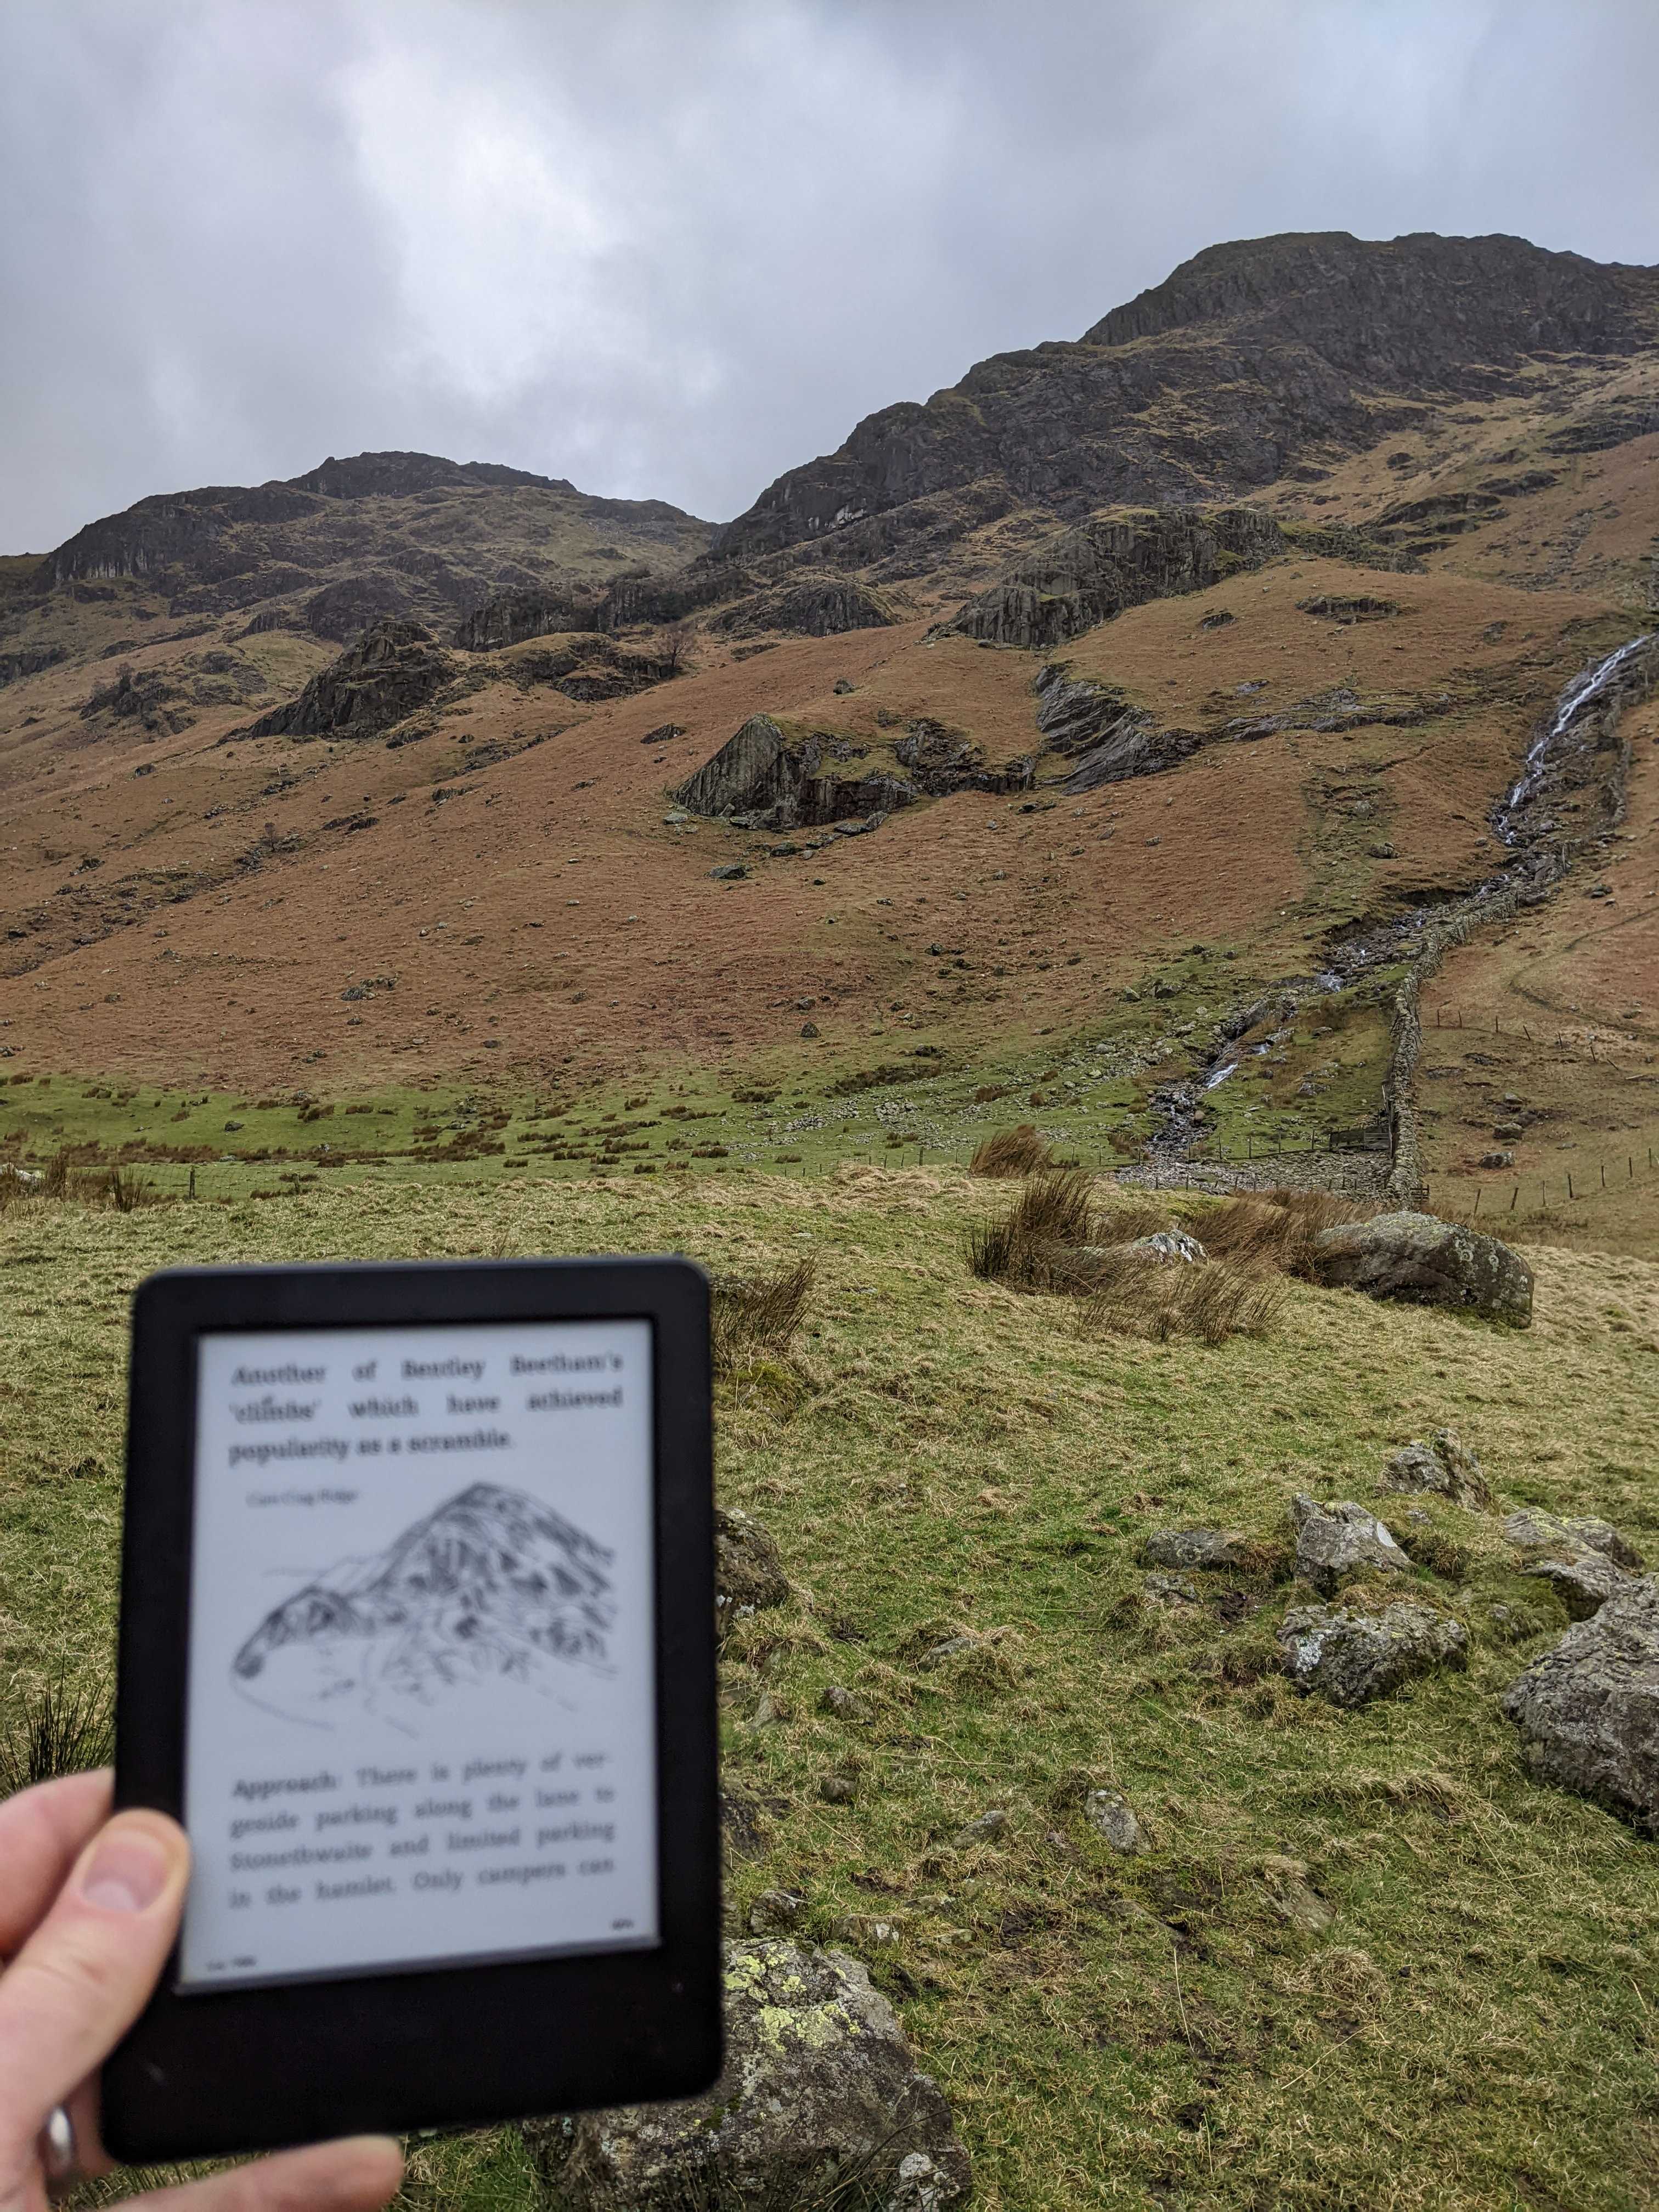 Controversially using a kindle for route finding